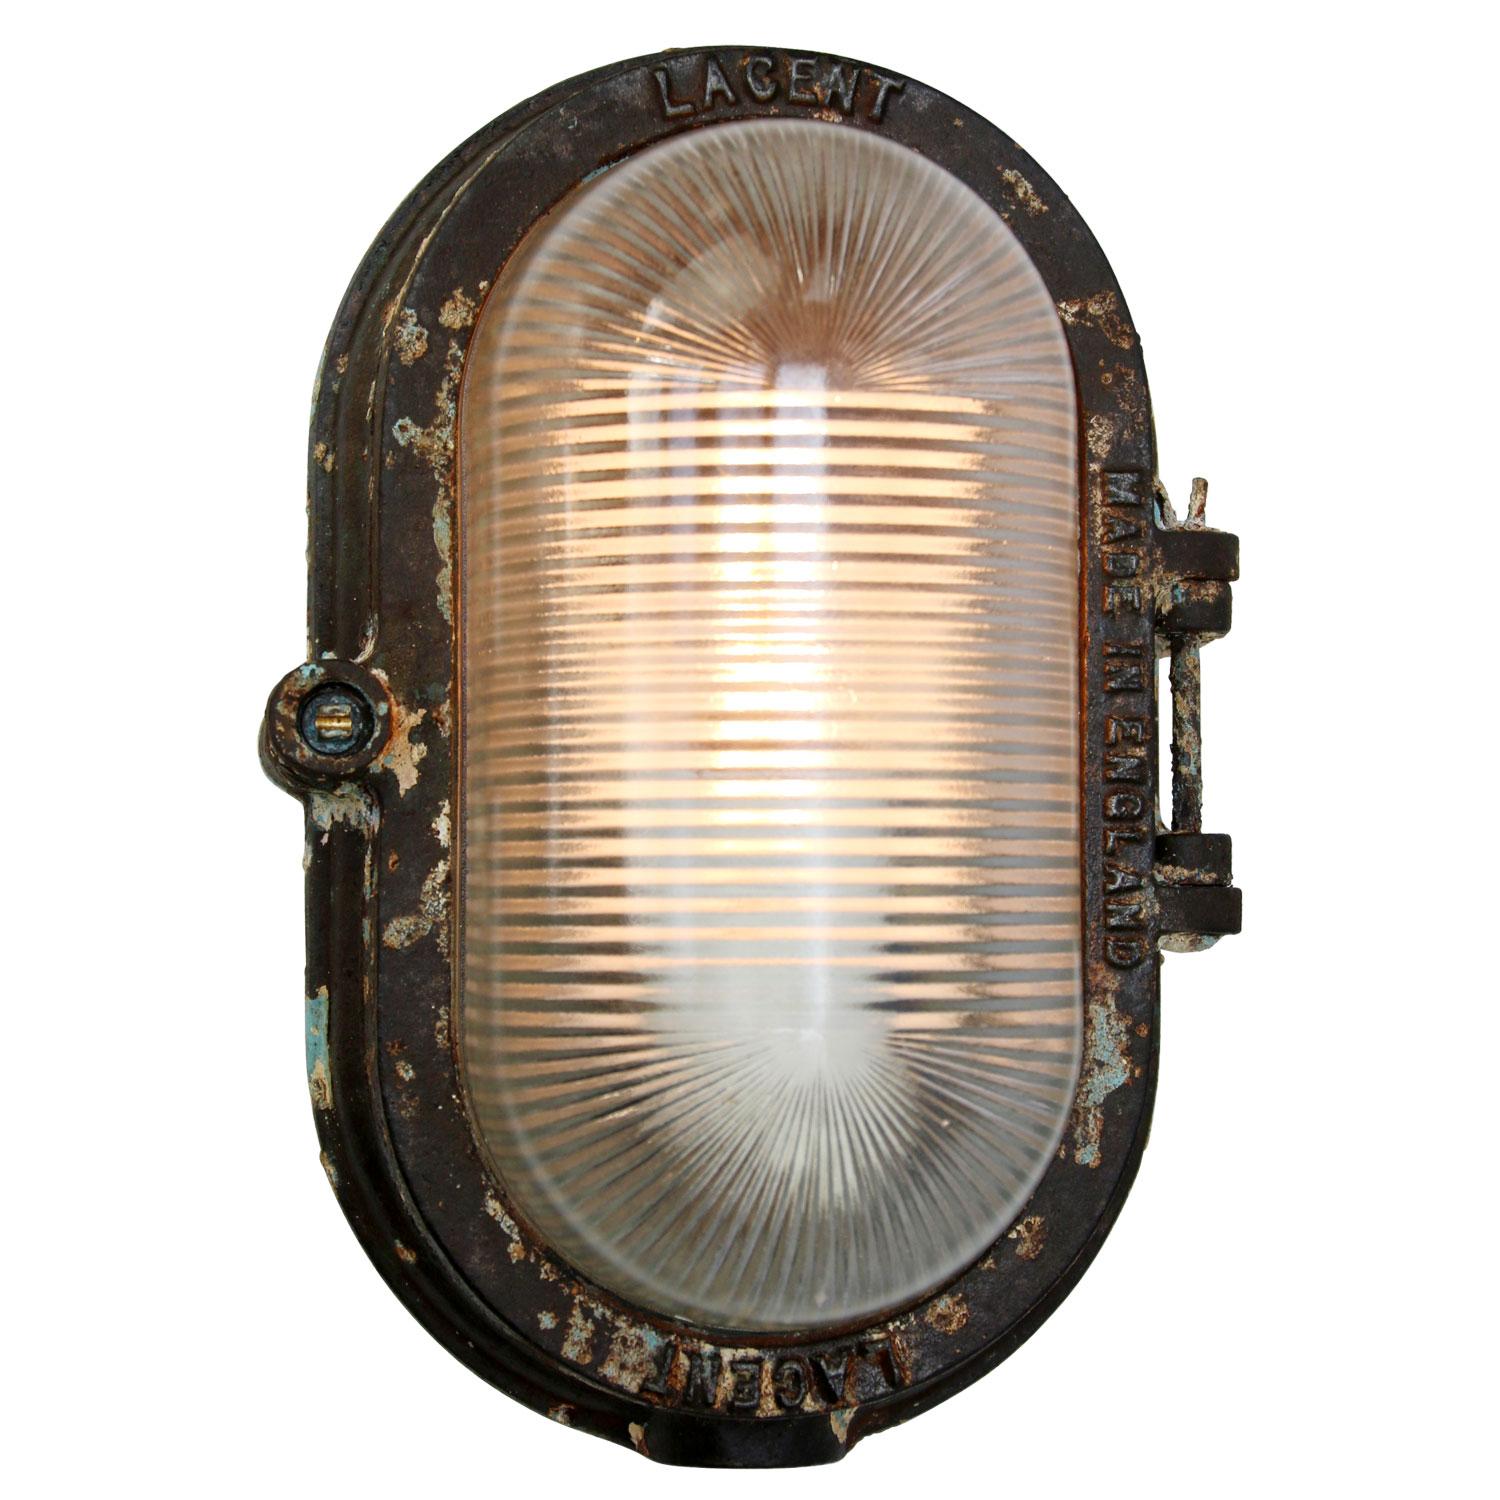 British Industrial wall/ceiling Classic
cast iron with striped glass 

Weight: 3.35 kg / 7.4 lb

Priced per individual item. All lamps have been made suitable by international standards for incandescent light bulbs, energy-efficient and LED